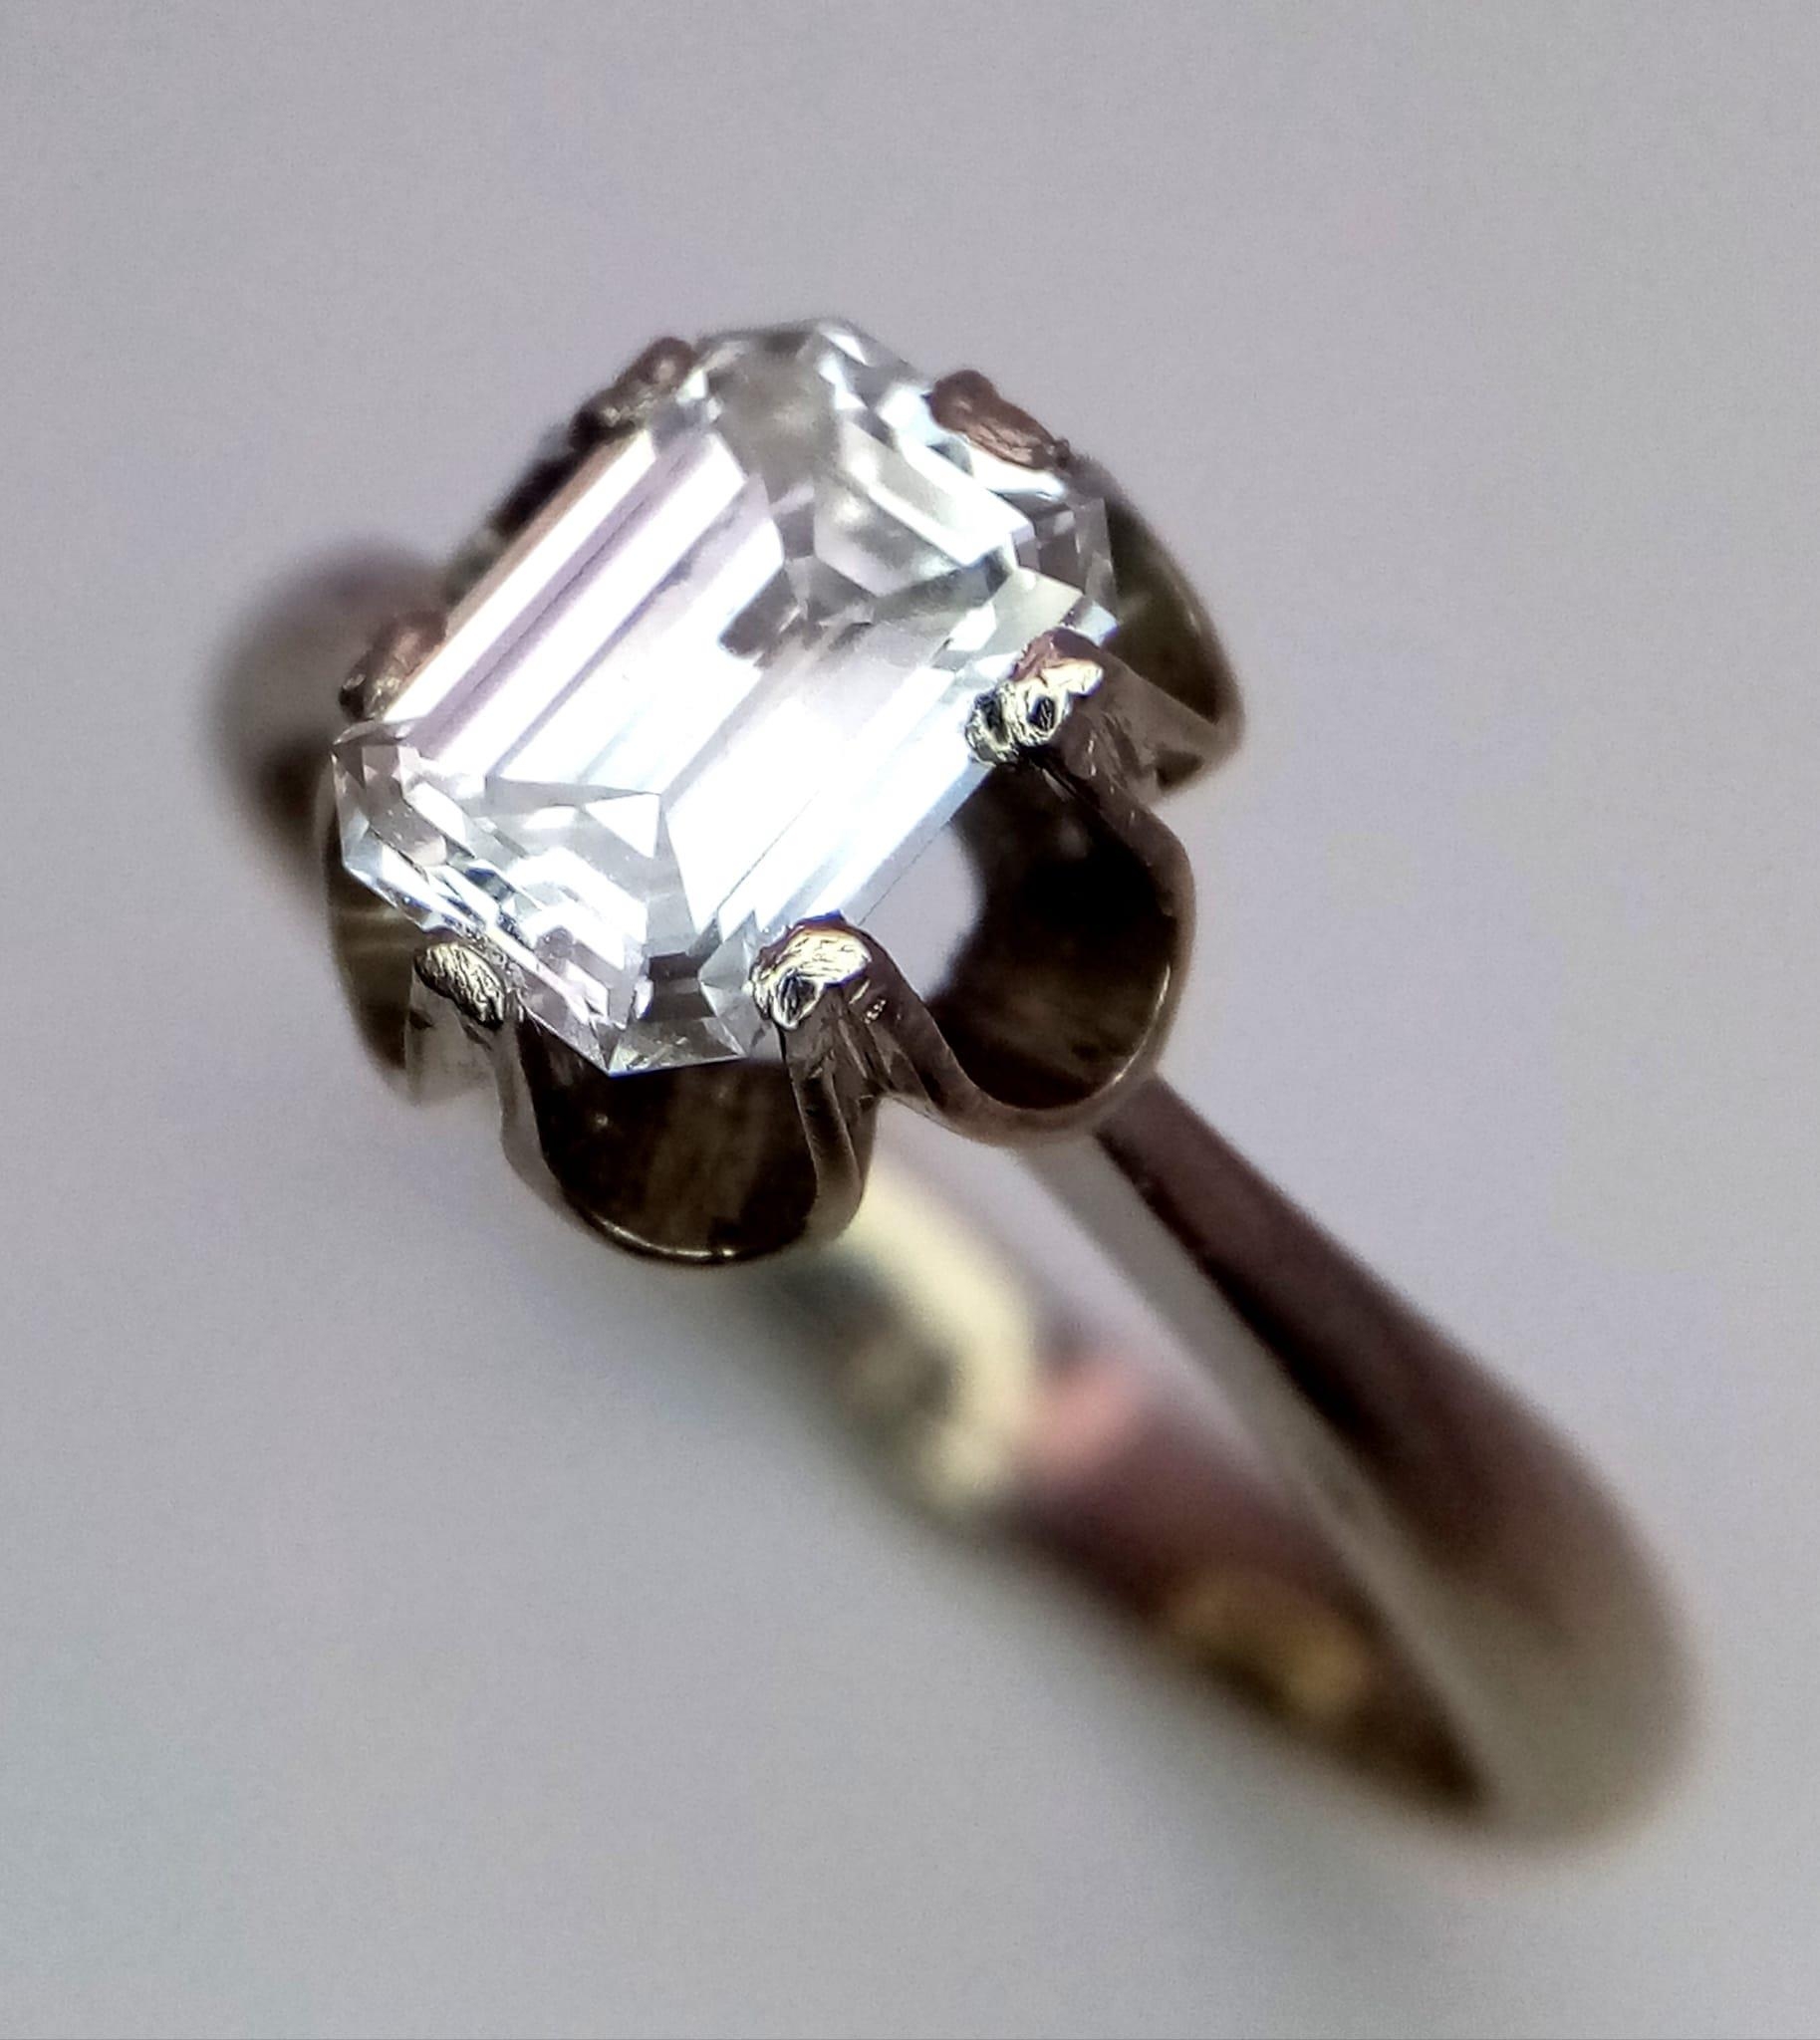 An 18K White Gold (tested) Emerald Cut Diamond Solitaire Ring. Beautiful 1ct central diamond. Size - Image 2 of 6